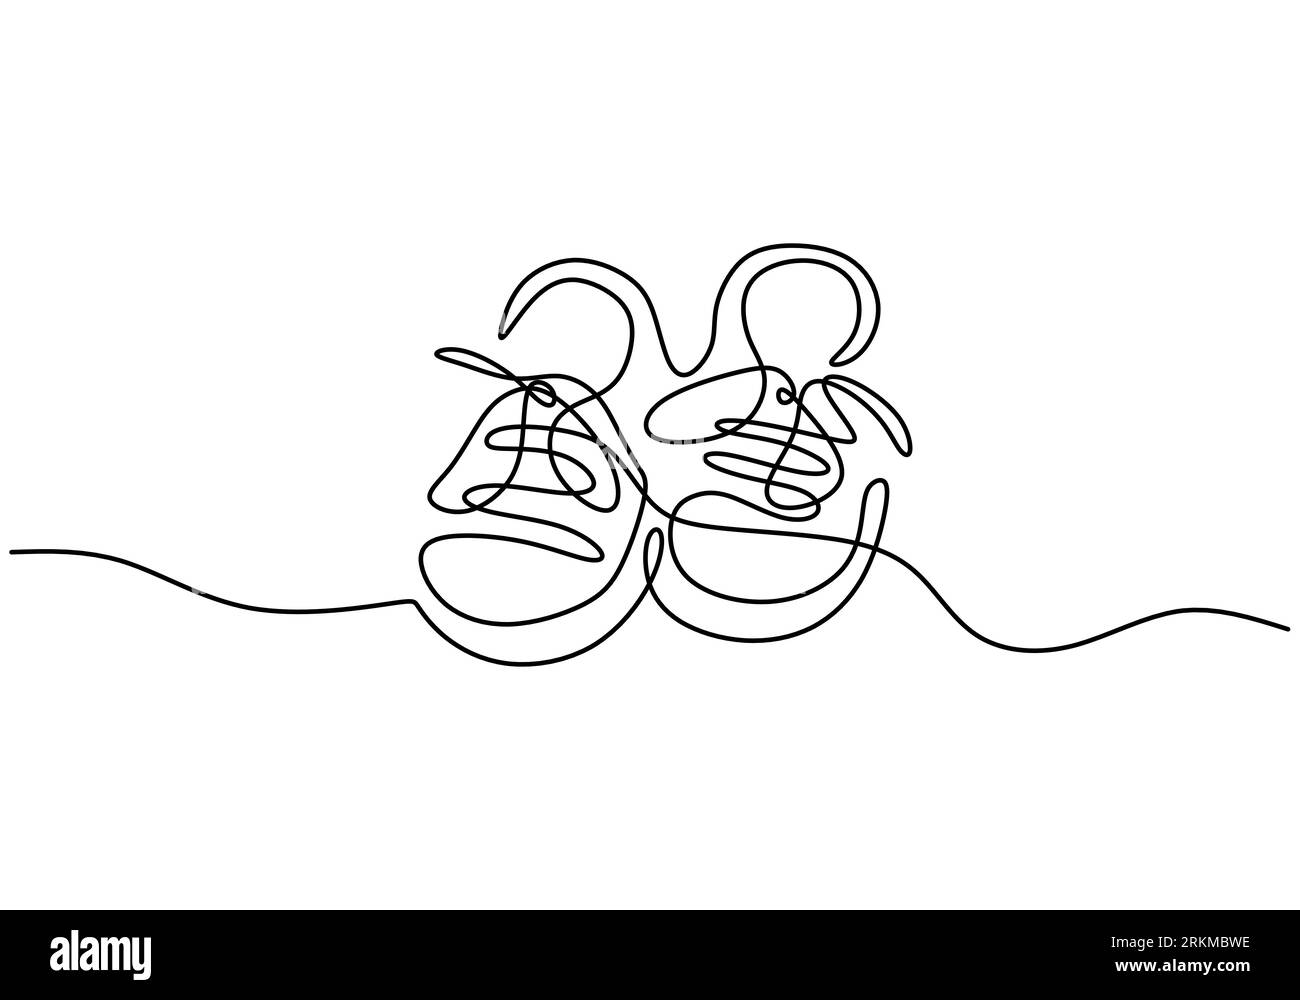 Continuous one line of a pair of baby shoes isolated on white background. For children or kids theme. Stock Vector